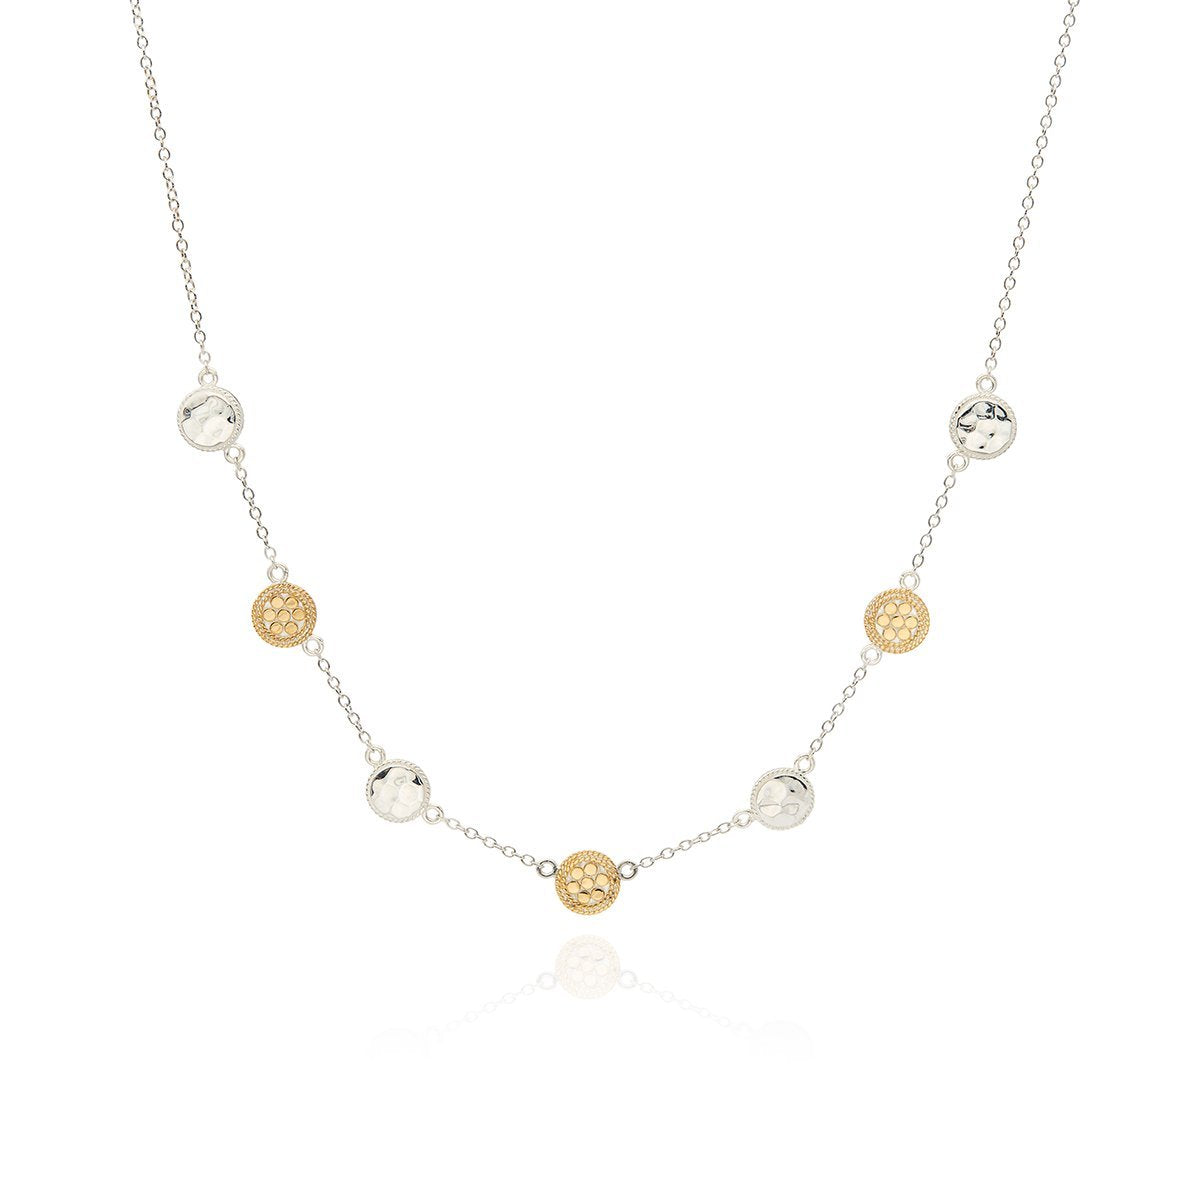 Sterling silver and gold plated necklace with circular charms